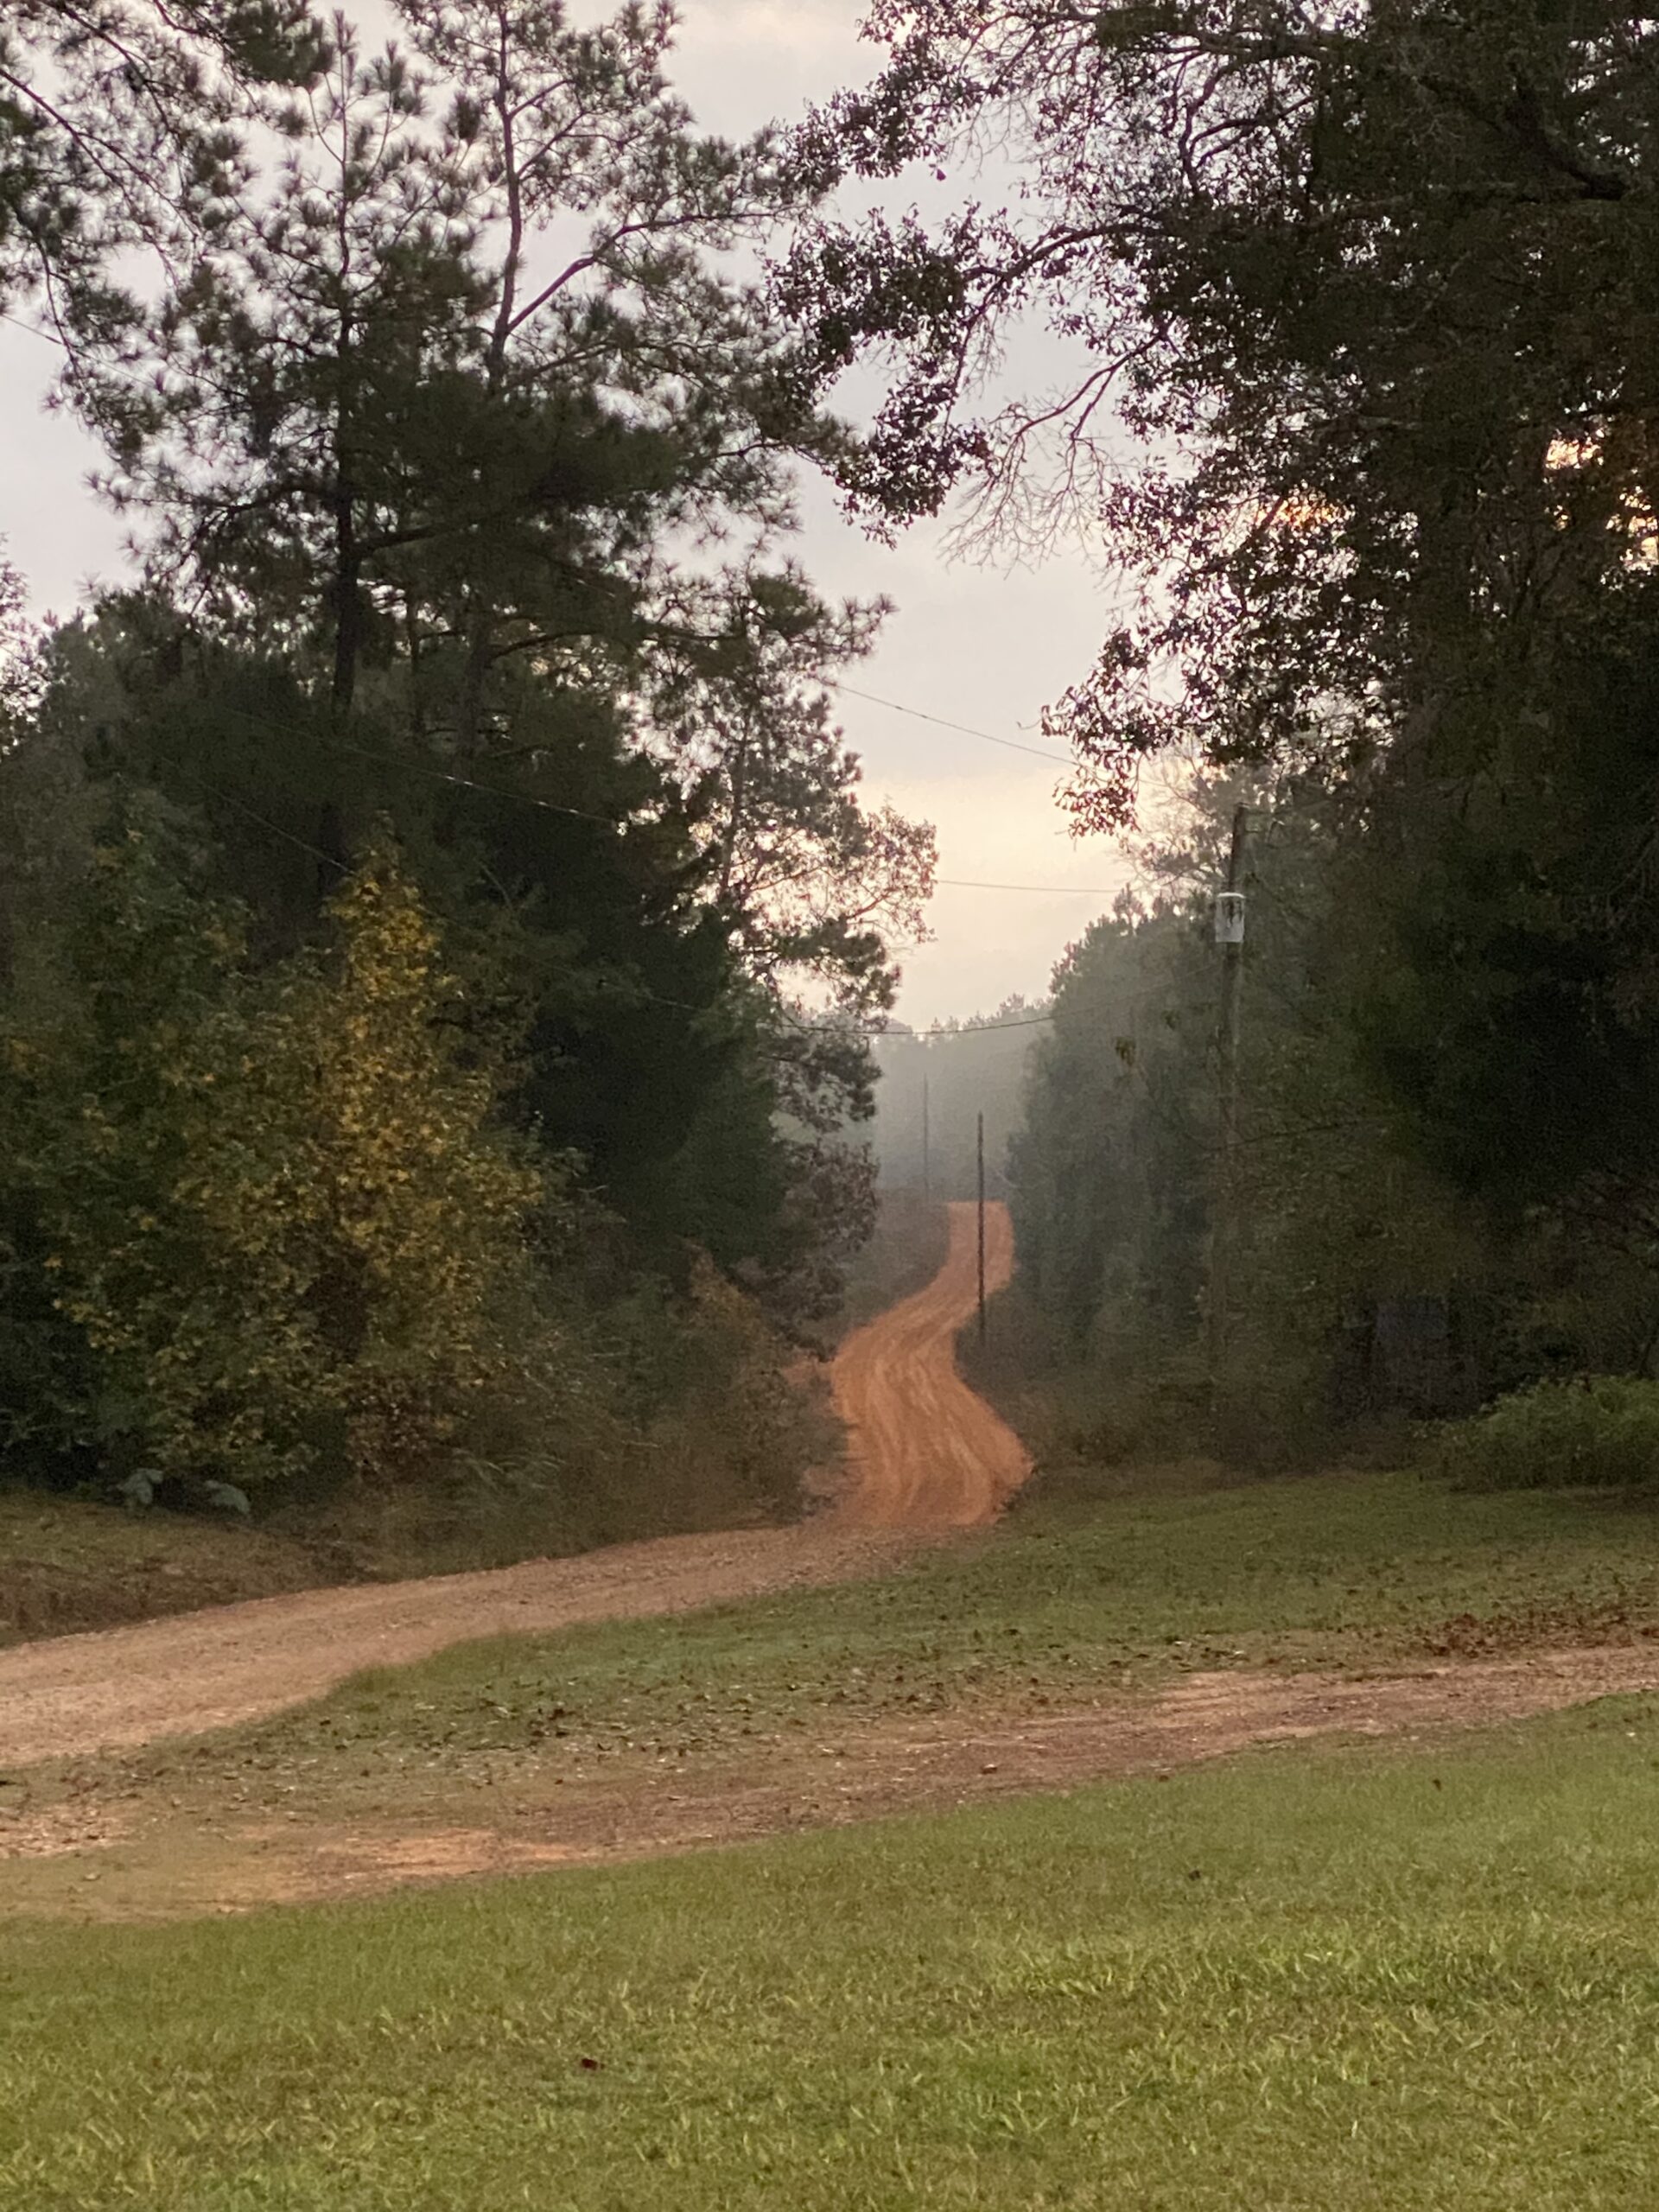 Season of Change: Leaves and Wind on the Red Dirt Road